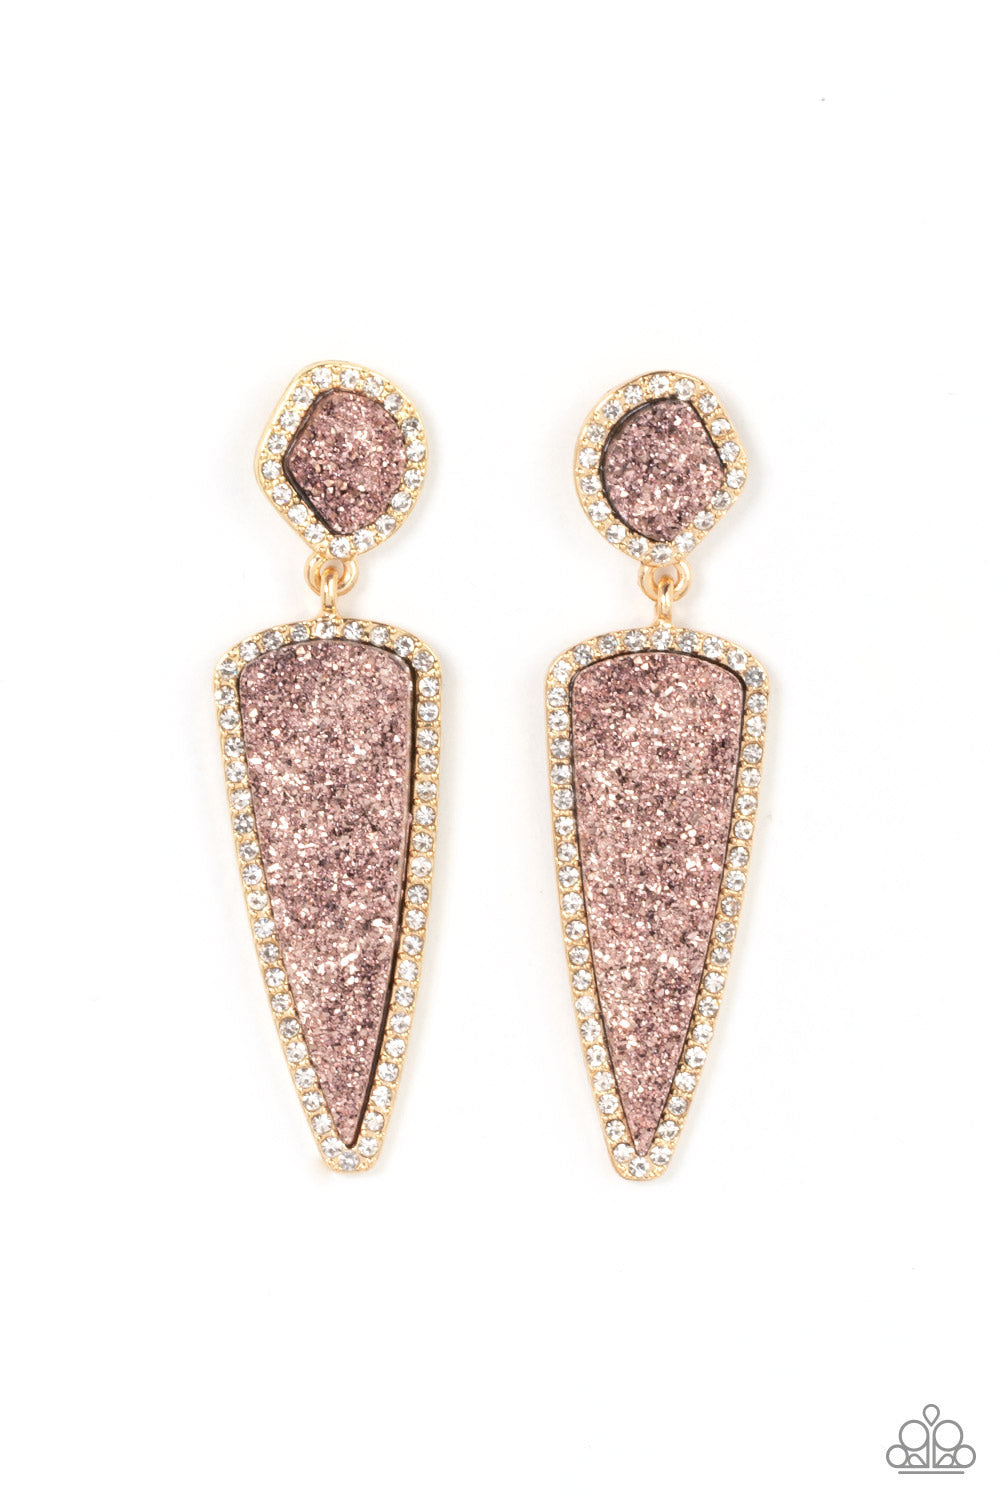 Paparazzi Accessories - Druzy Desire - Gold Earrings featuring asymmetrical and triangular cuts, a pair of pink druzy-like accents are encased inside white rhinestone dotted gold frames as they link into a jaw-dropping lure. Earring attaches to a standard post fitting.  Sold as one pair of post earrings.